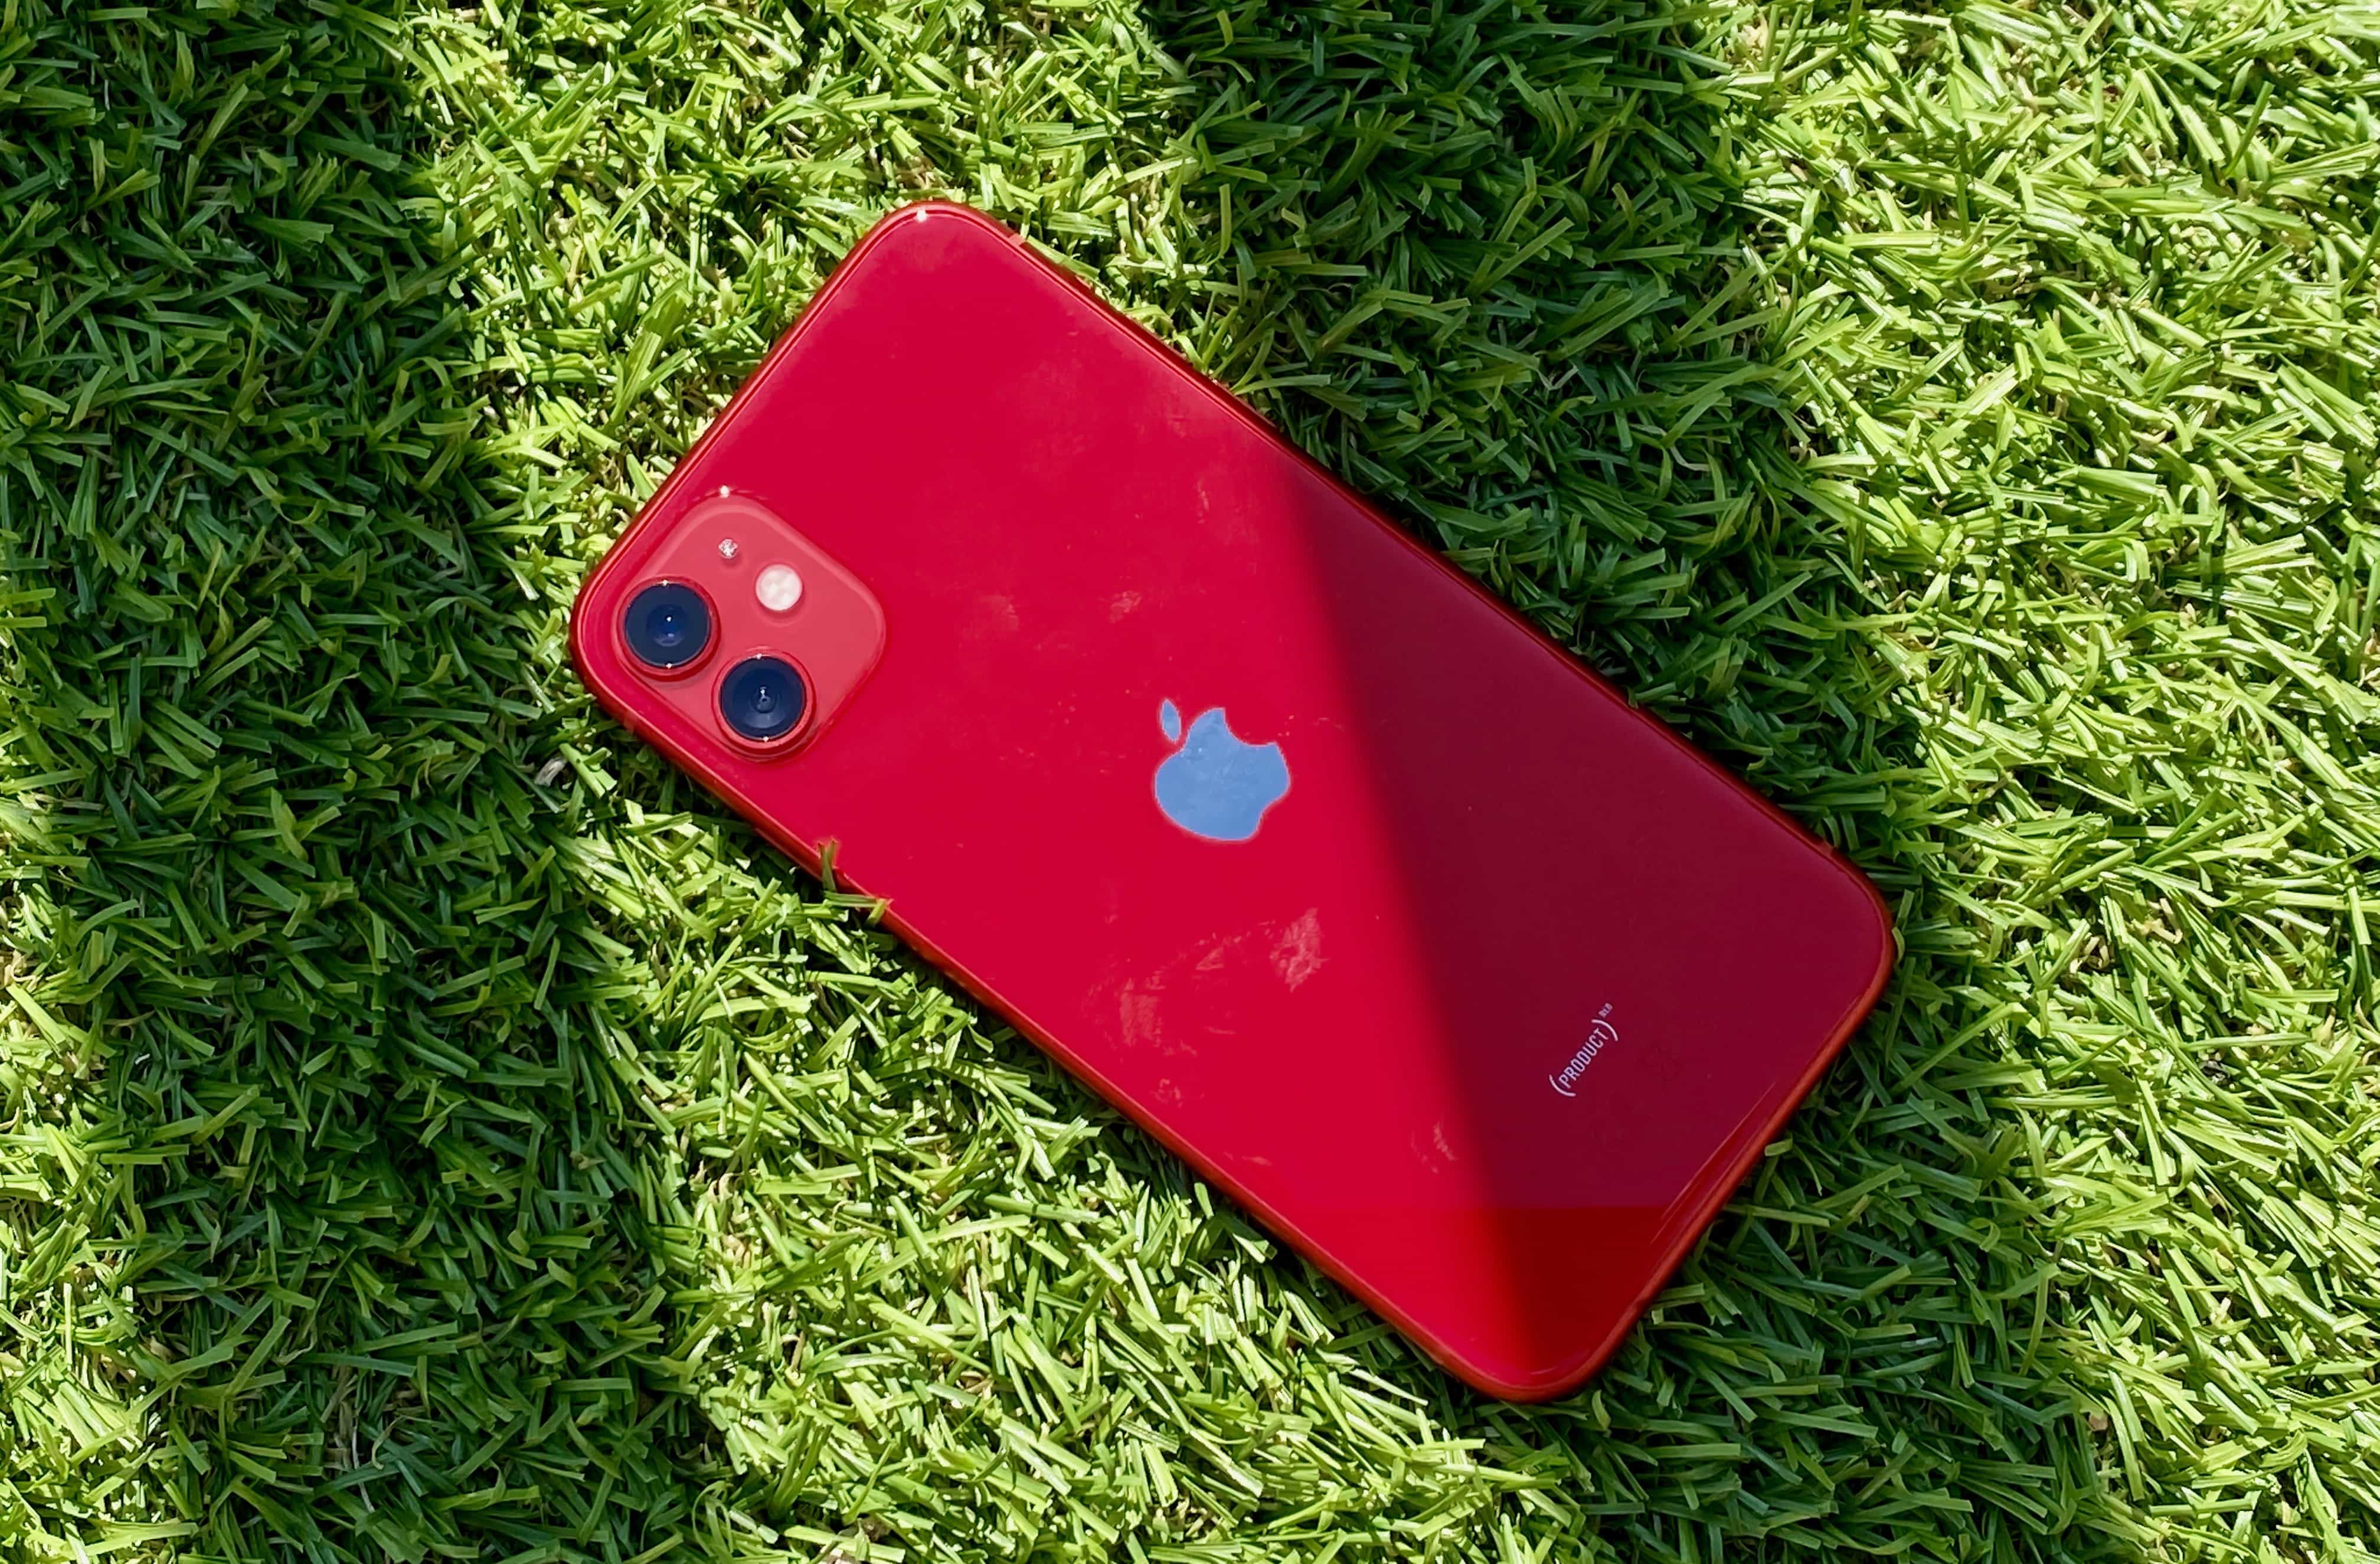 iPhone 11 continues to shine while iPhone 11 Pro Max sales flatten out